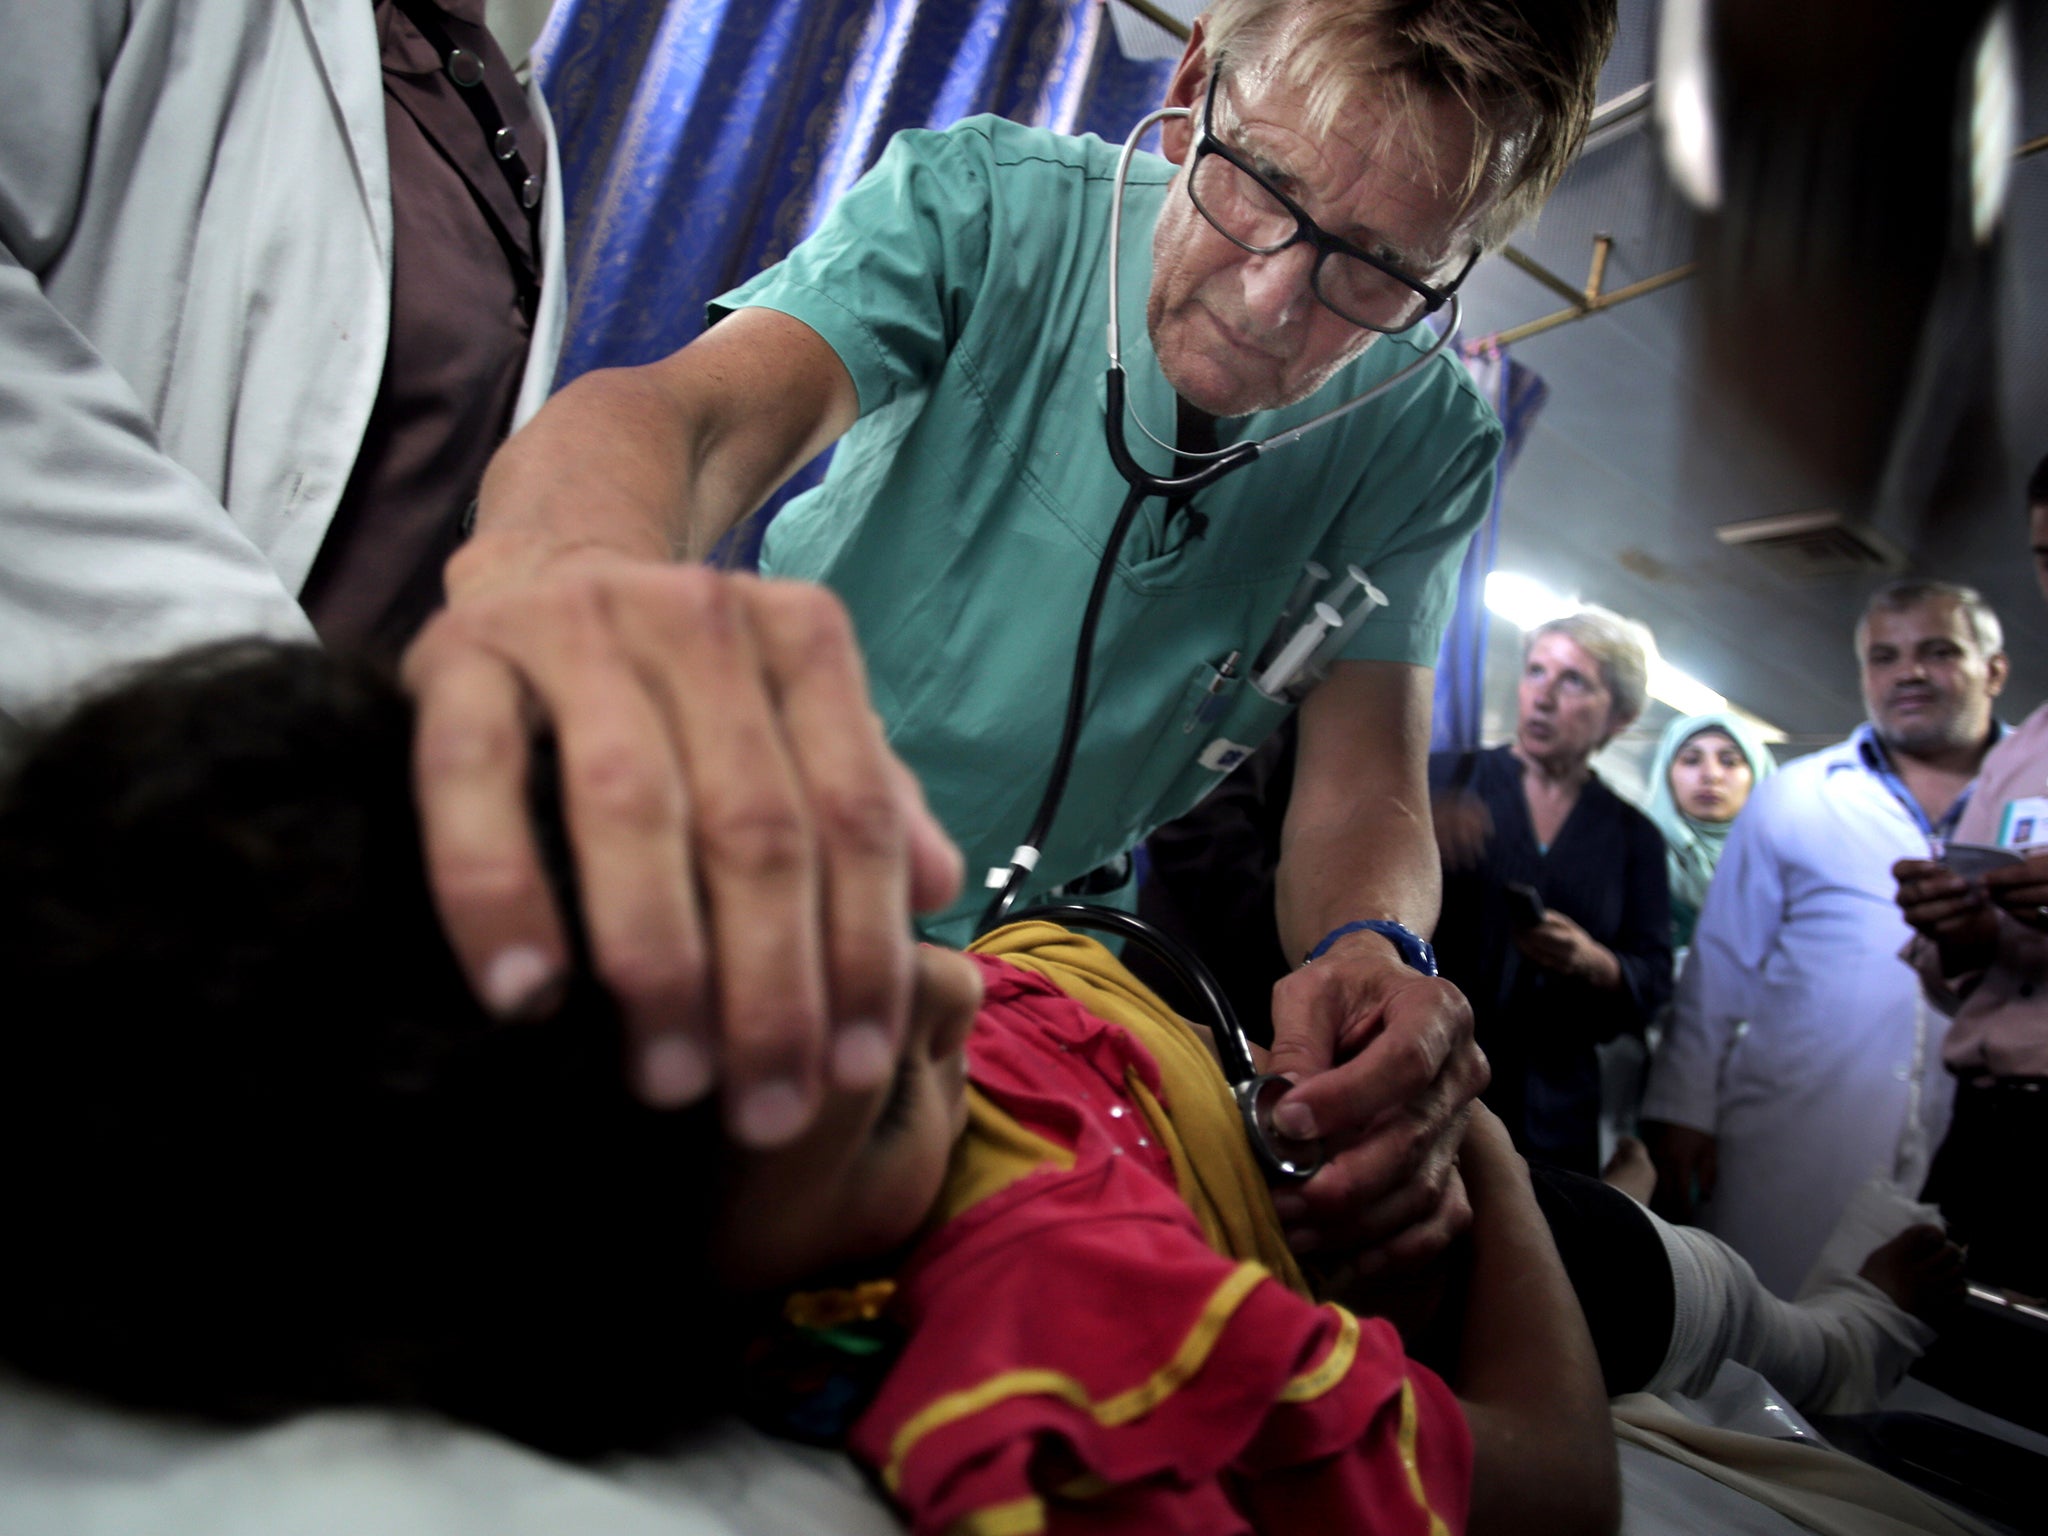 Dr Mads Gilbert, seen here tending a Palestinian child, says the ban is not about him but about denying medical aid to Gaza